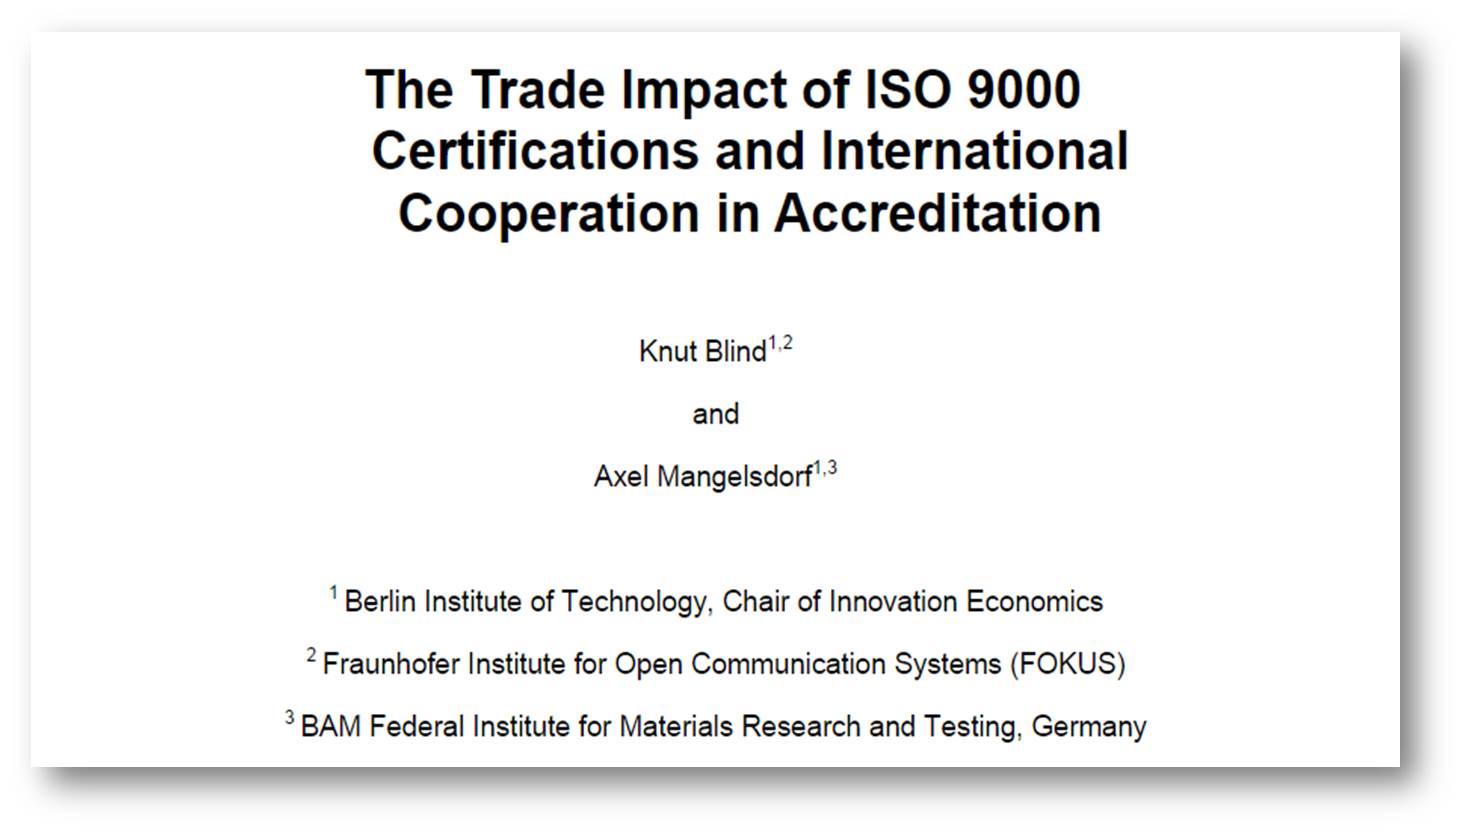 The Trade Impact of ISO 9000 Certifications and International Cooperation in Accreditation